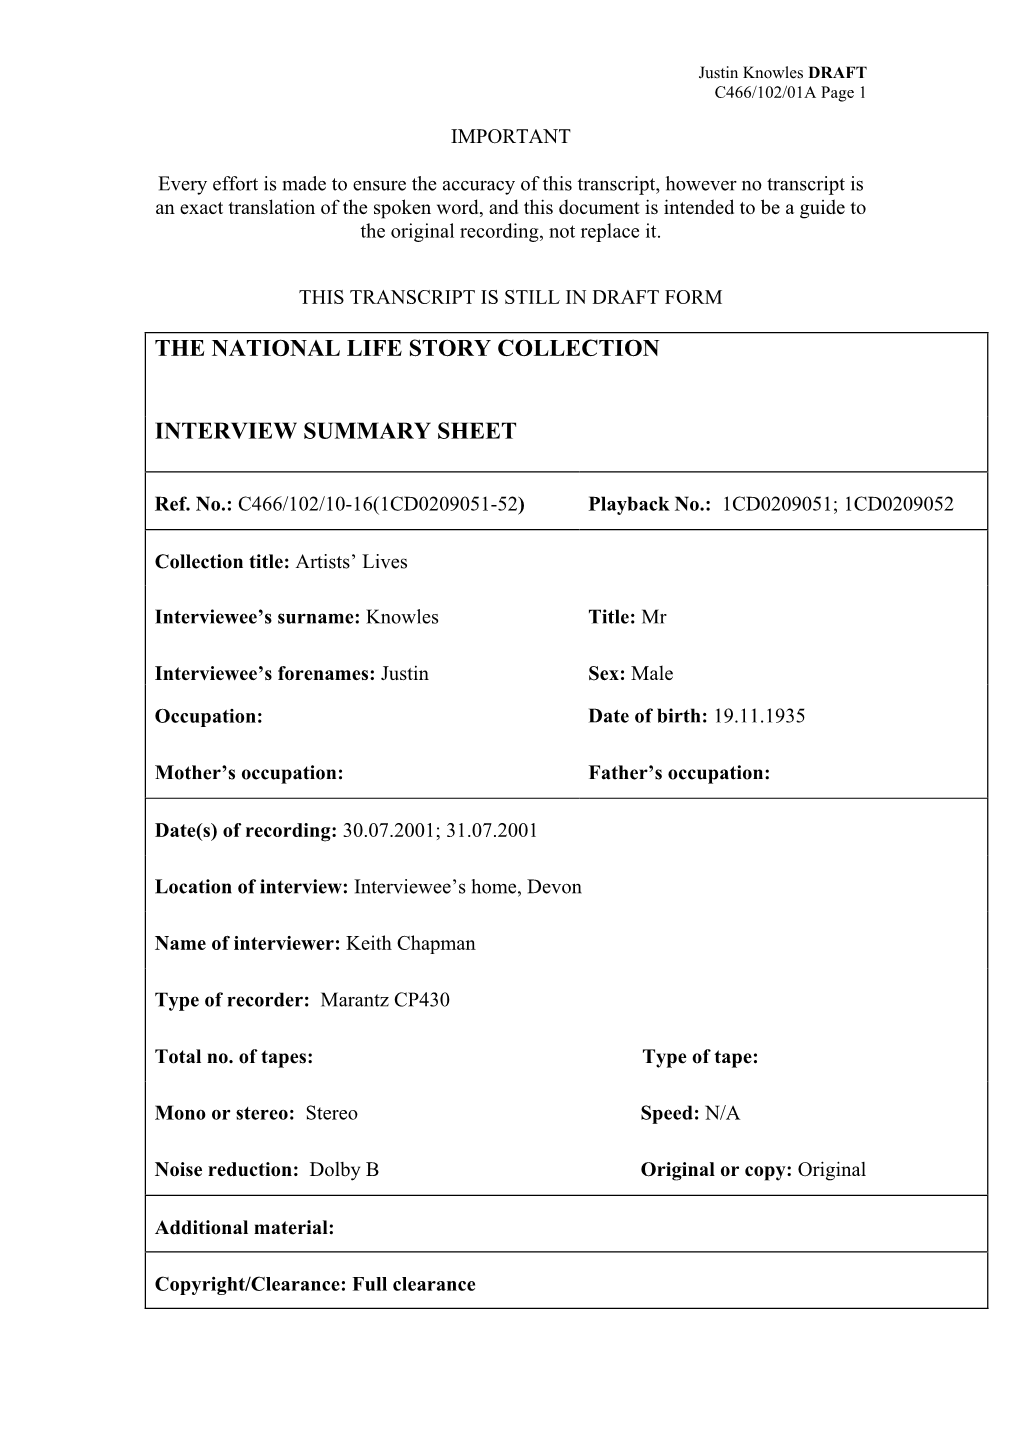 The National Life Story Collection Interview Summary Sheet